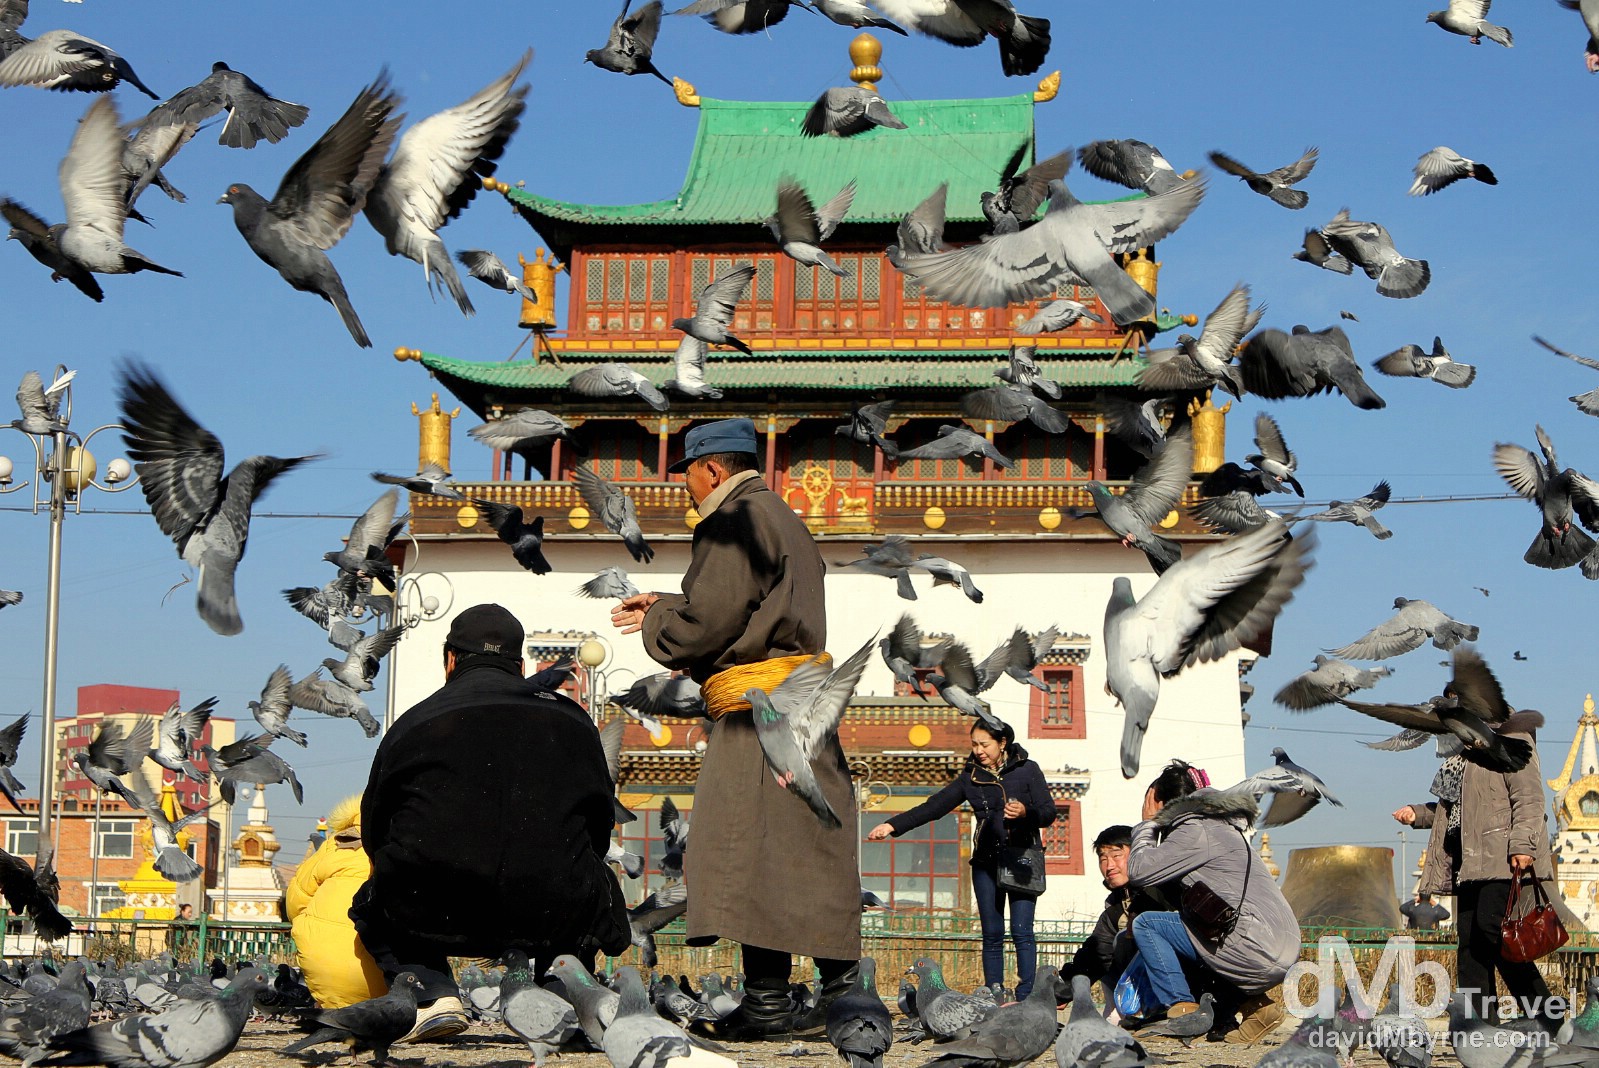 Pigeons (lots of them) & people in front of Migjid Janraisig Sum in Ulan Bator, Mongolia. November 1st 2012.